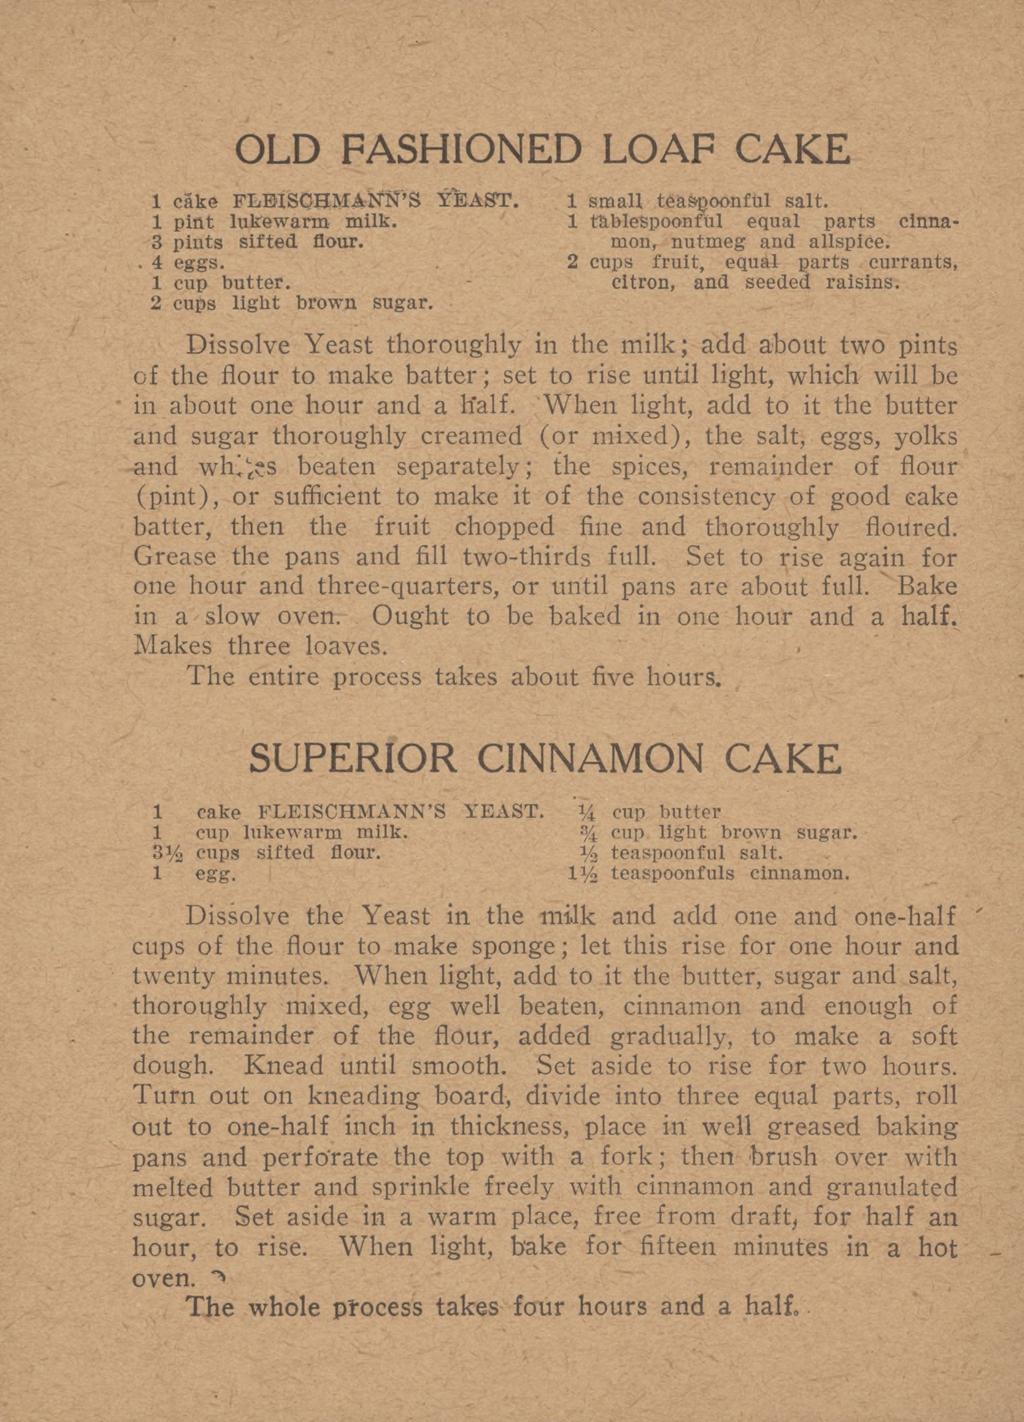 OLD FASHIONED LOAF CAKE 1 cake FLEISCHMANN S YEAST. 1 small tea^oonftil salt. 1 pint lukewarm milk. 1 tkblespoonful equal parts cinna- 3 pints sifted flour. mon, nutmeg and allspice.. 4 eggs.